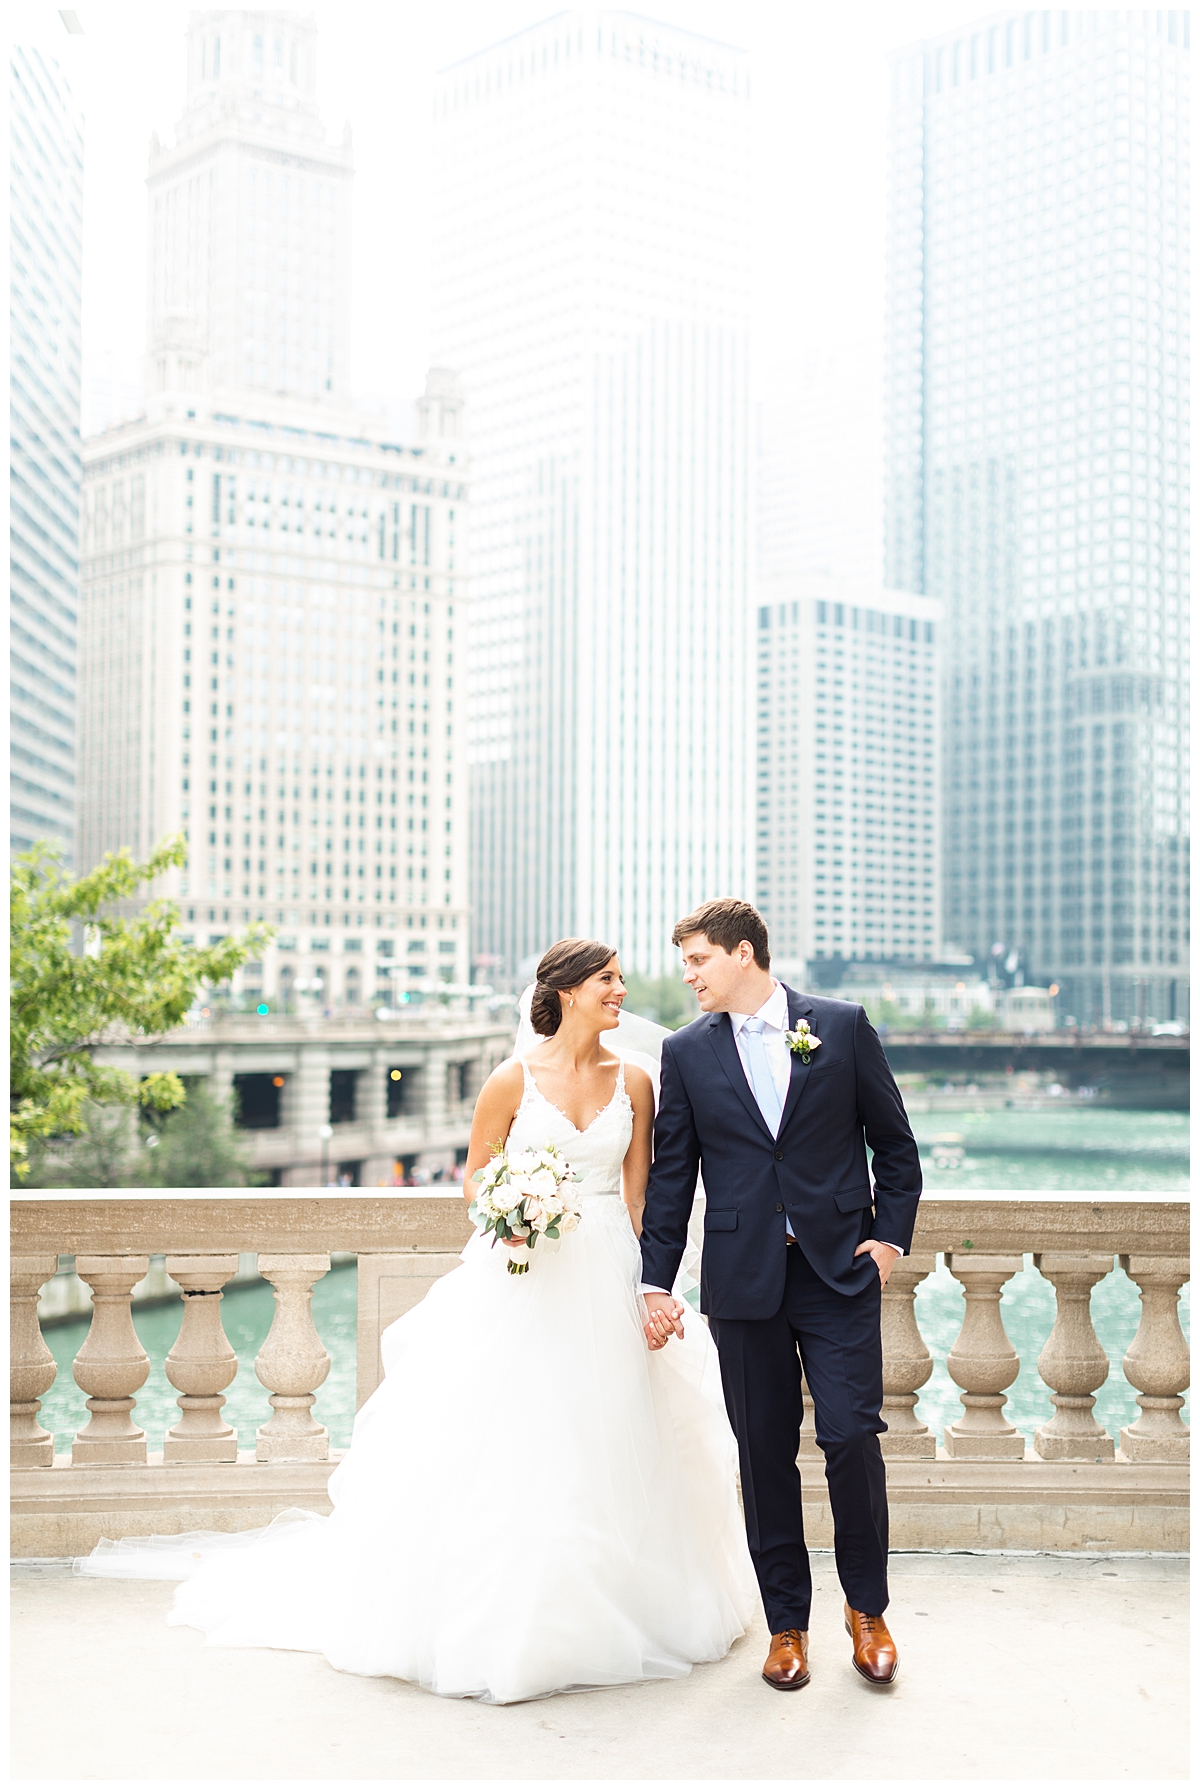 The bride and groom are pictured in their formalwear with downtown Chicago behind them. 